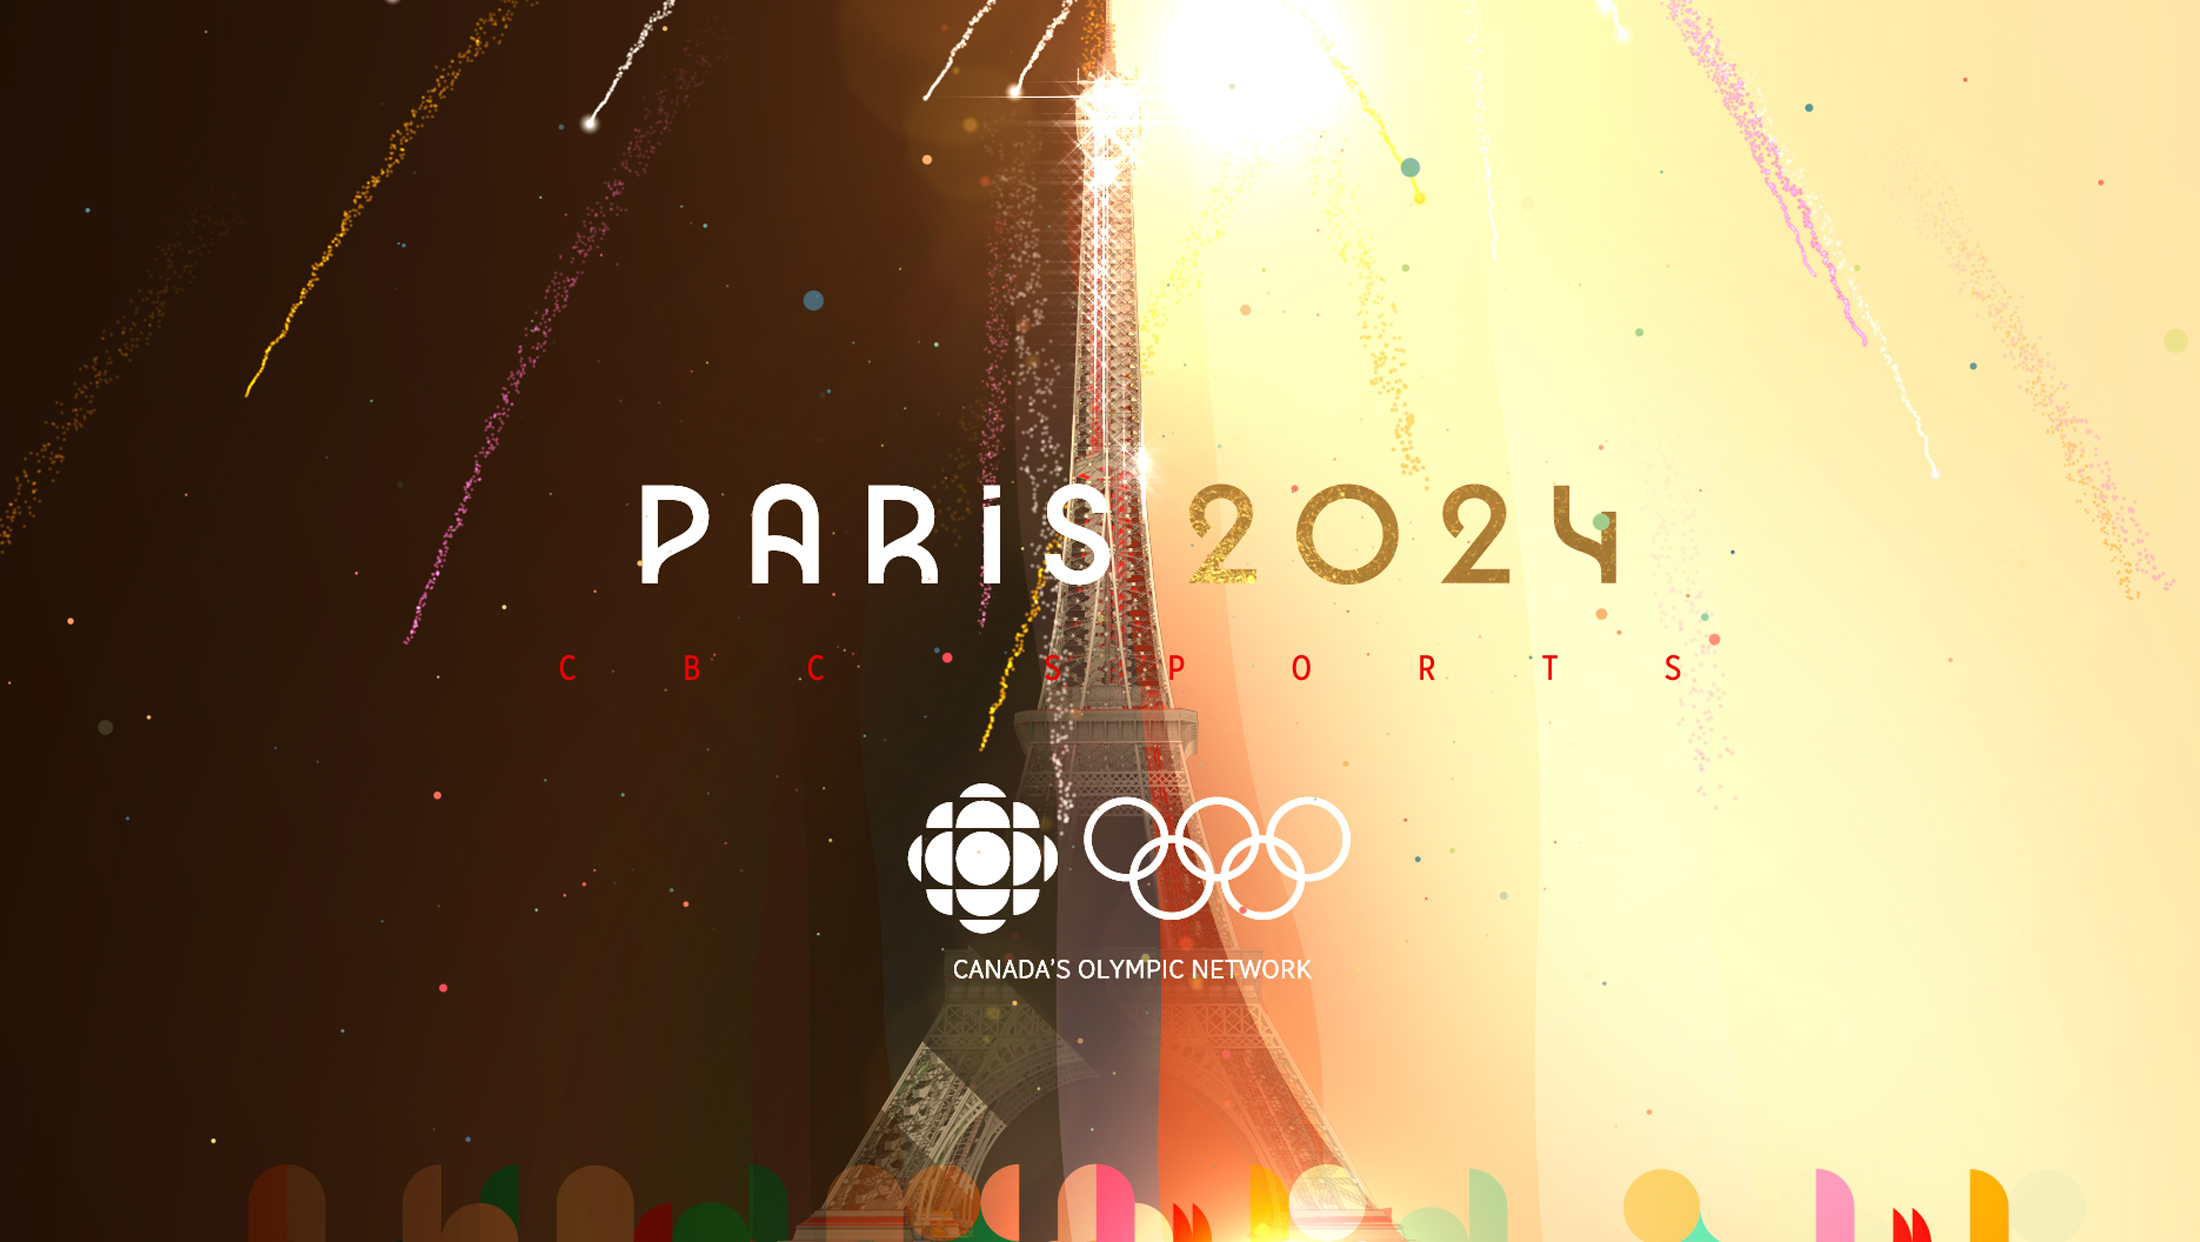 First look: CBC releases Olympics look that blends art deco, Canadian-inspired elements [Video]